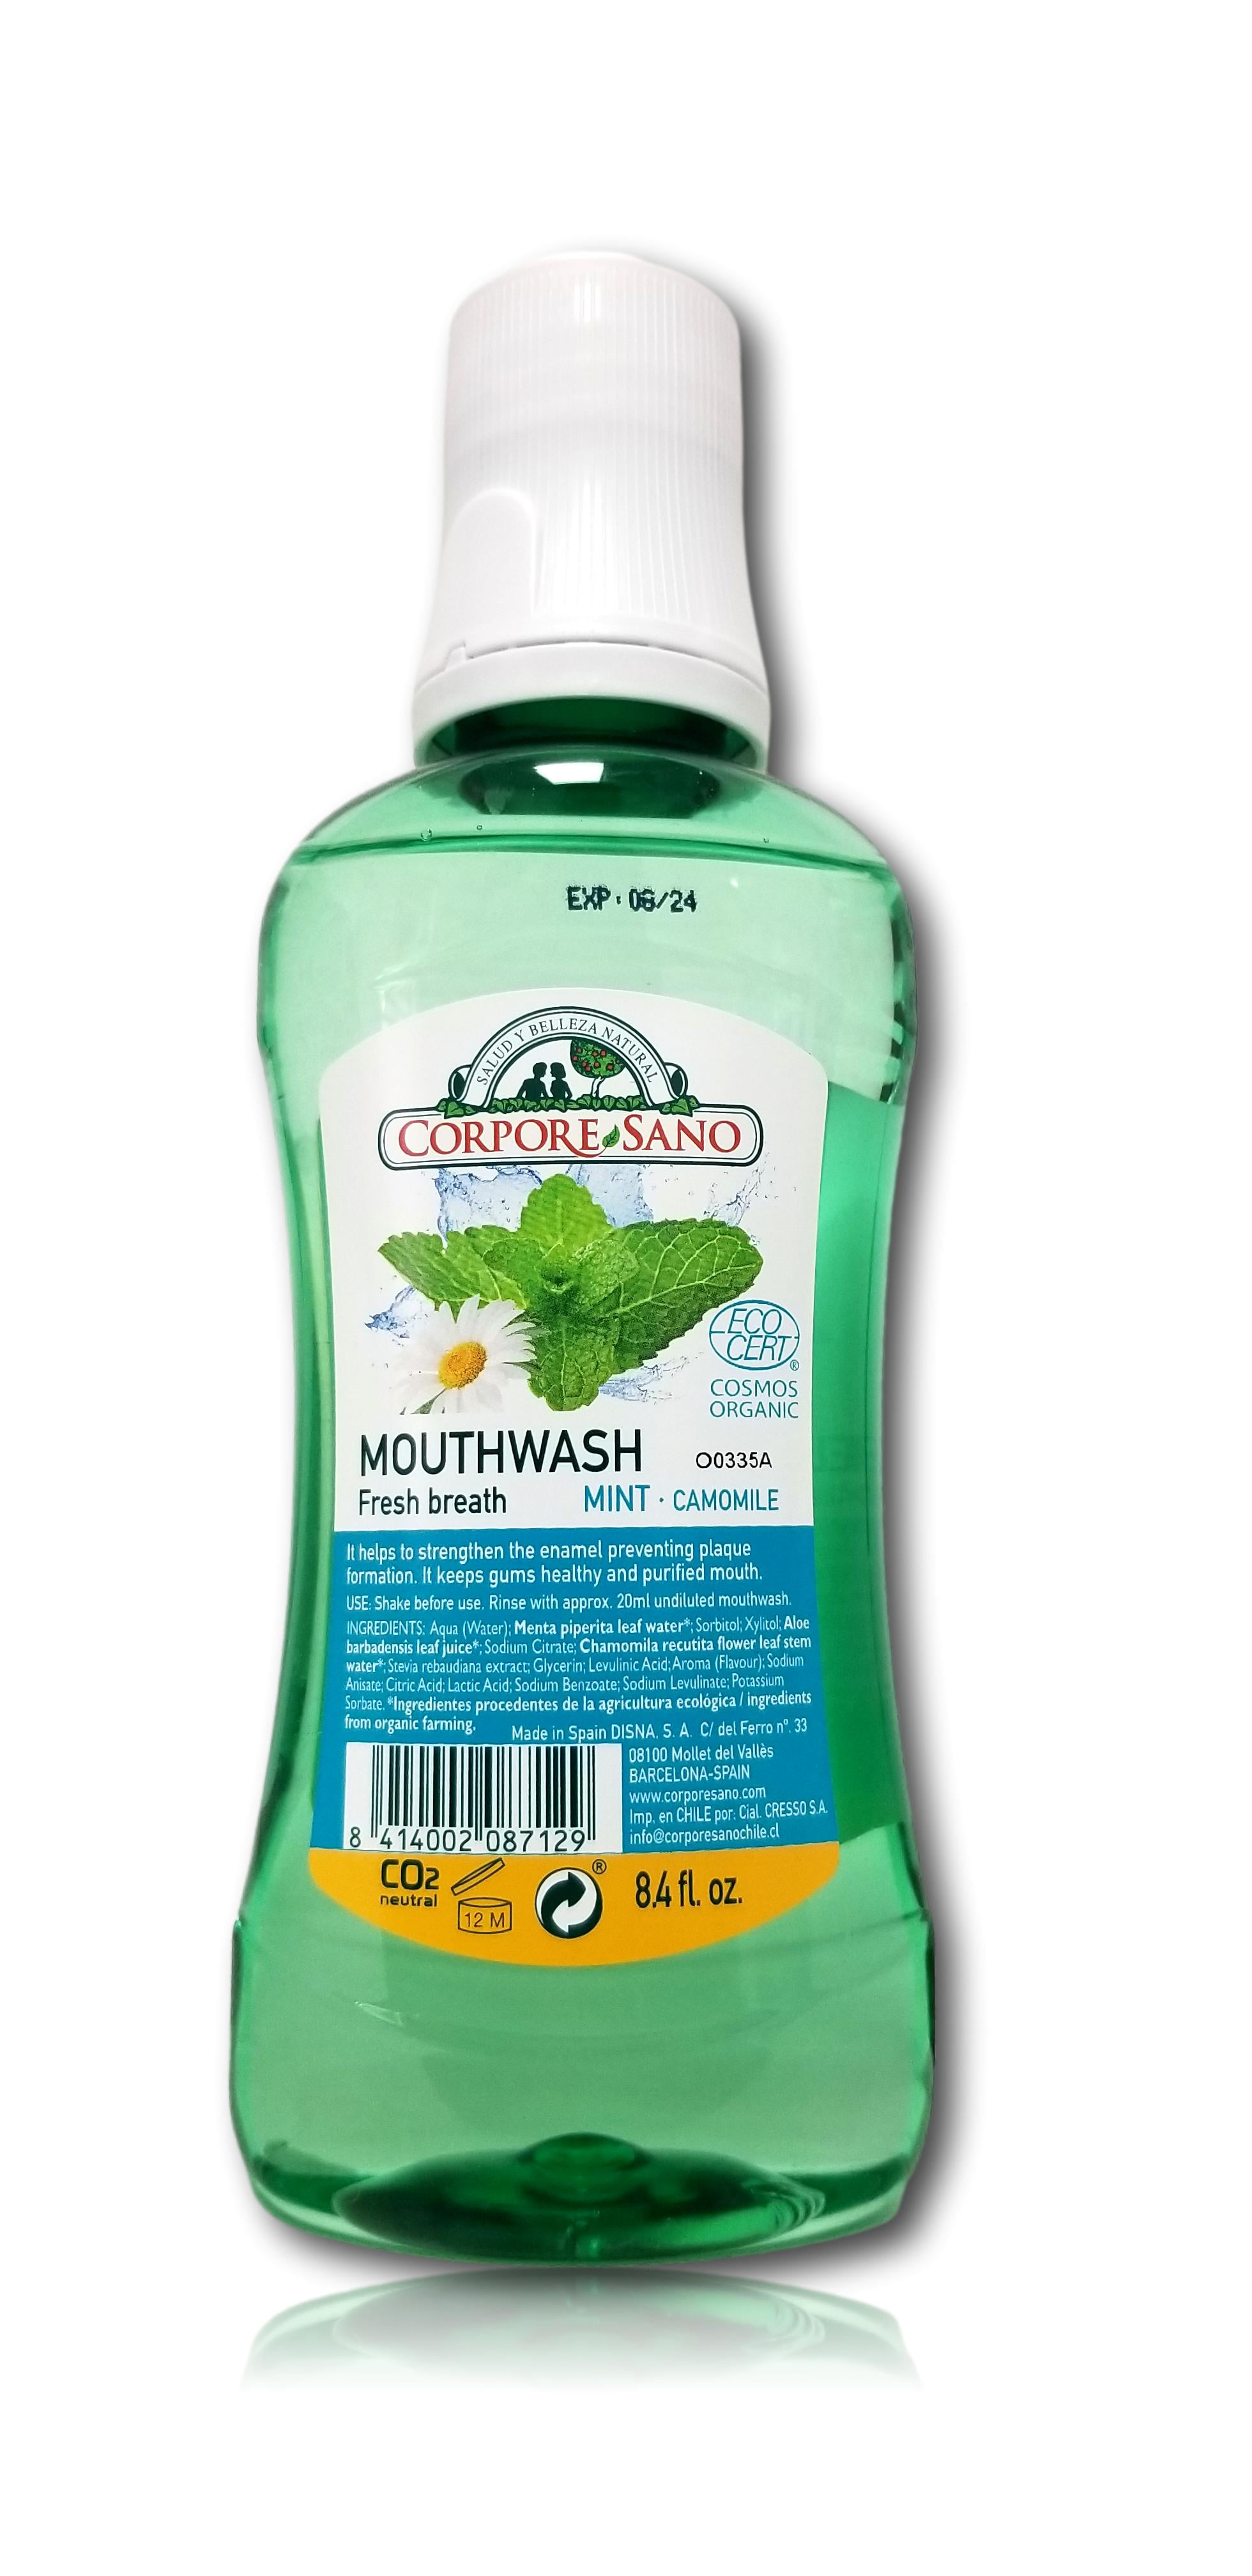 The Breath Co Clean Mint Oral Rinse Healthy Gums 500ML